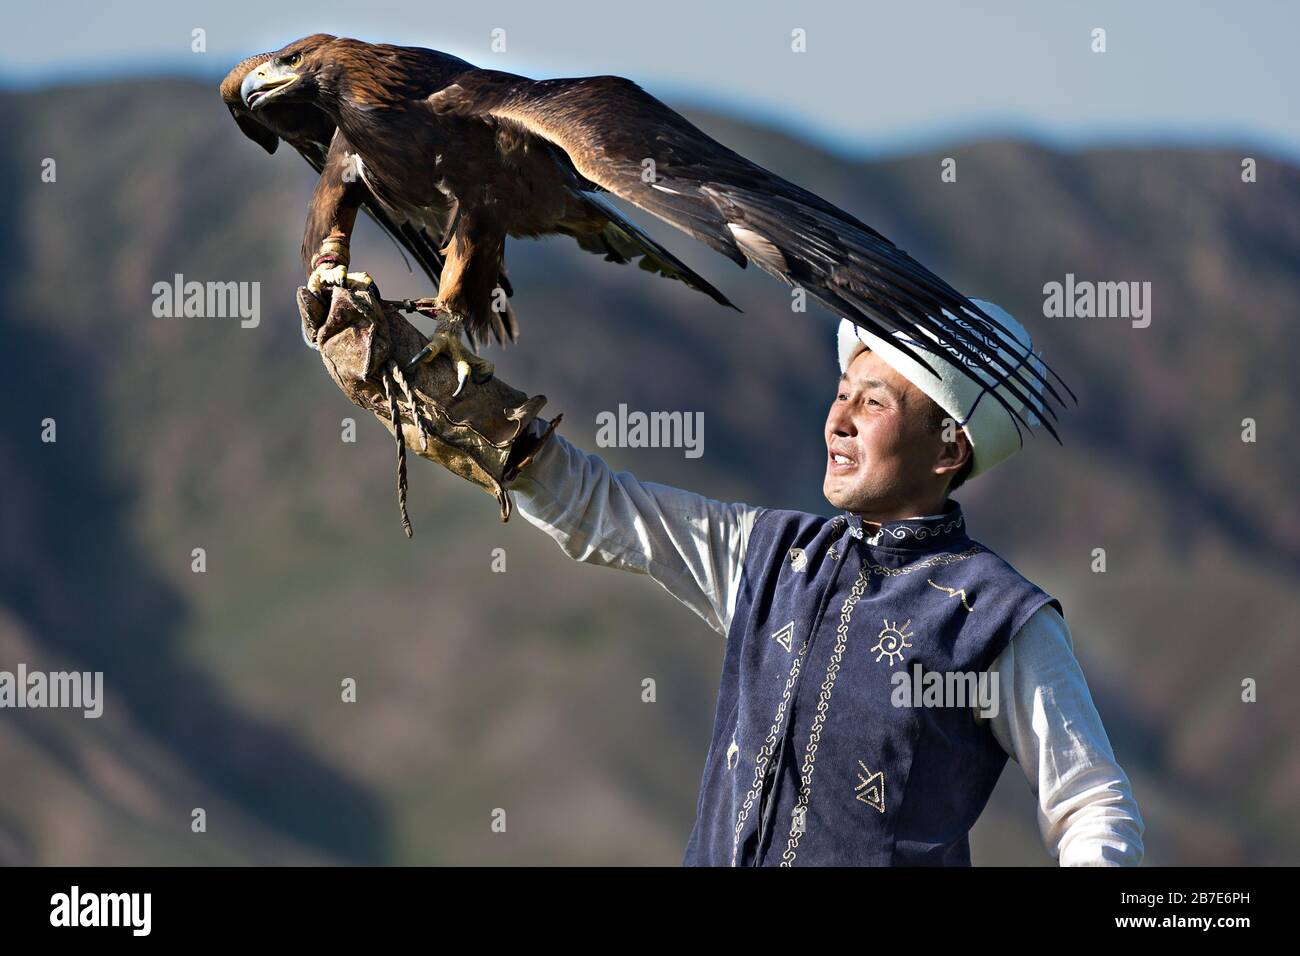 Golden eagle trainer holding his eagle Issyk Kul Lake, Kyrgyzstan Stock Photo